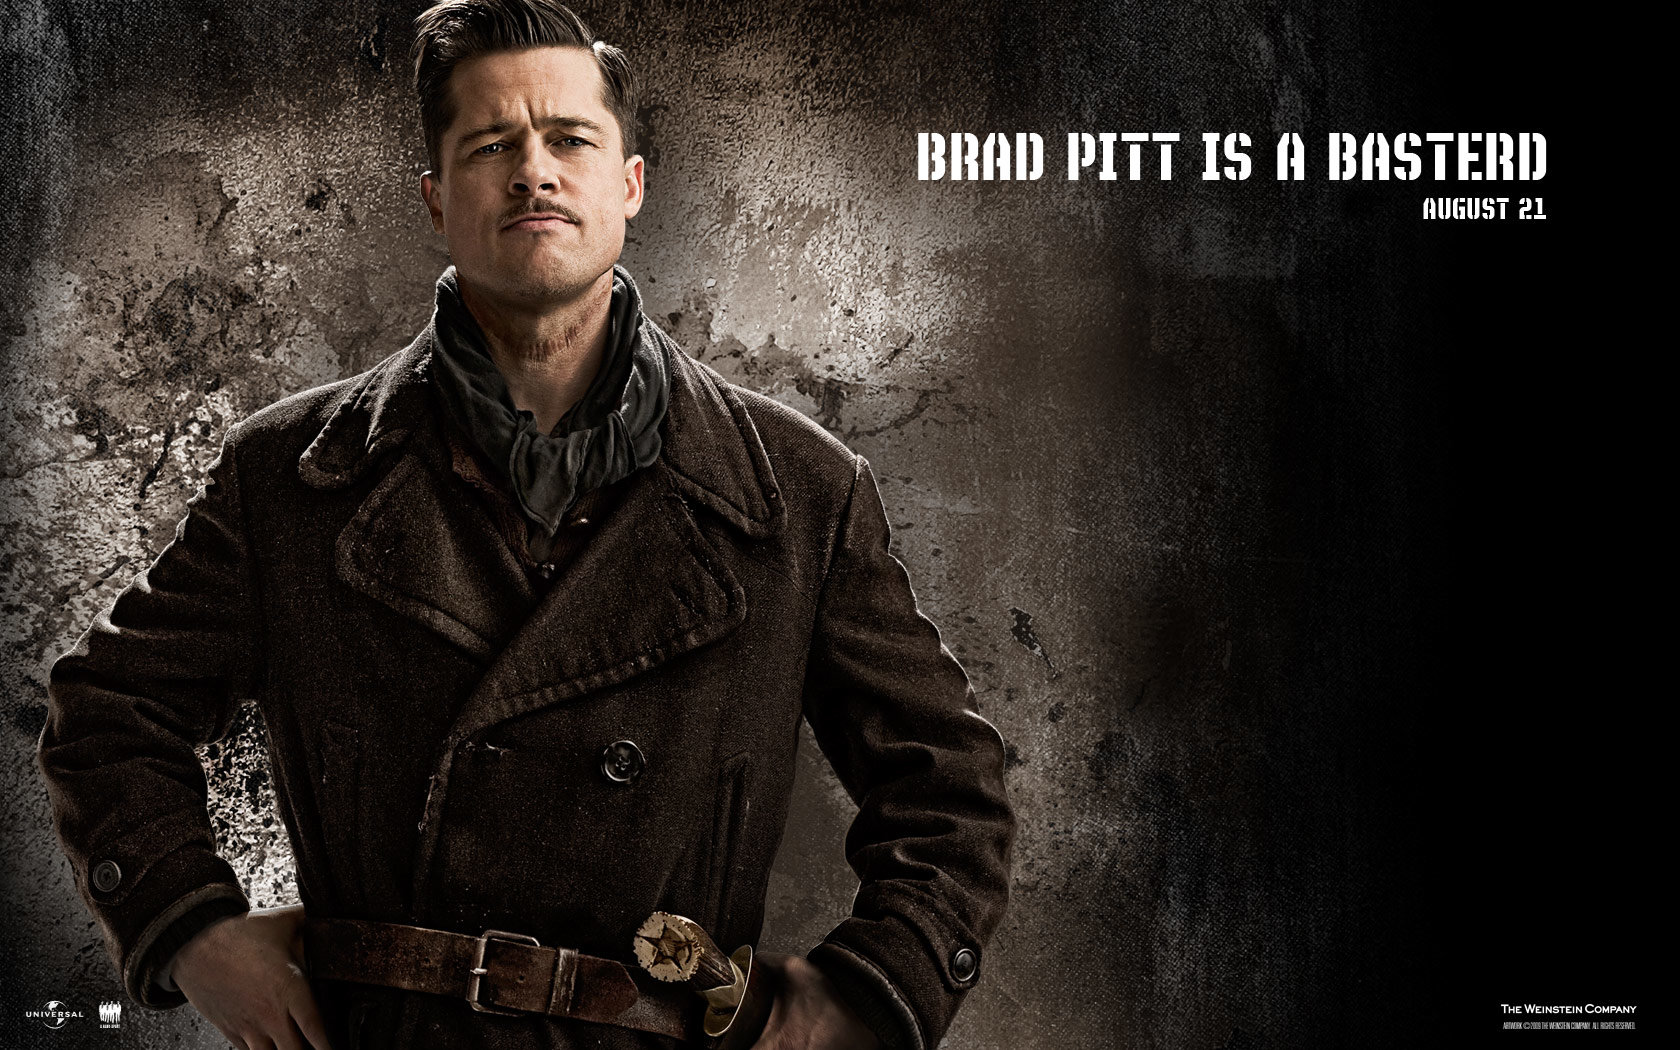 Inglourious Basterds Wallpapers Hd For Desktop Backgrounds Images, Photos, Reviews